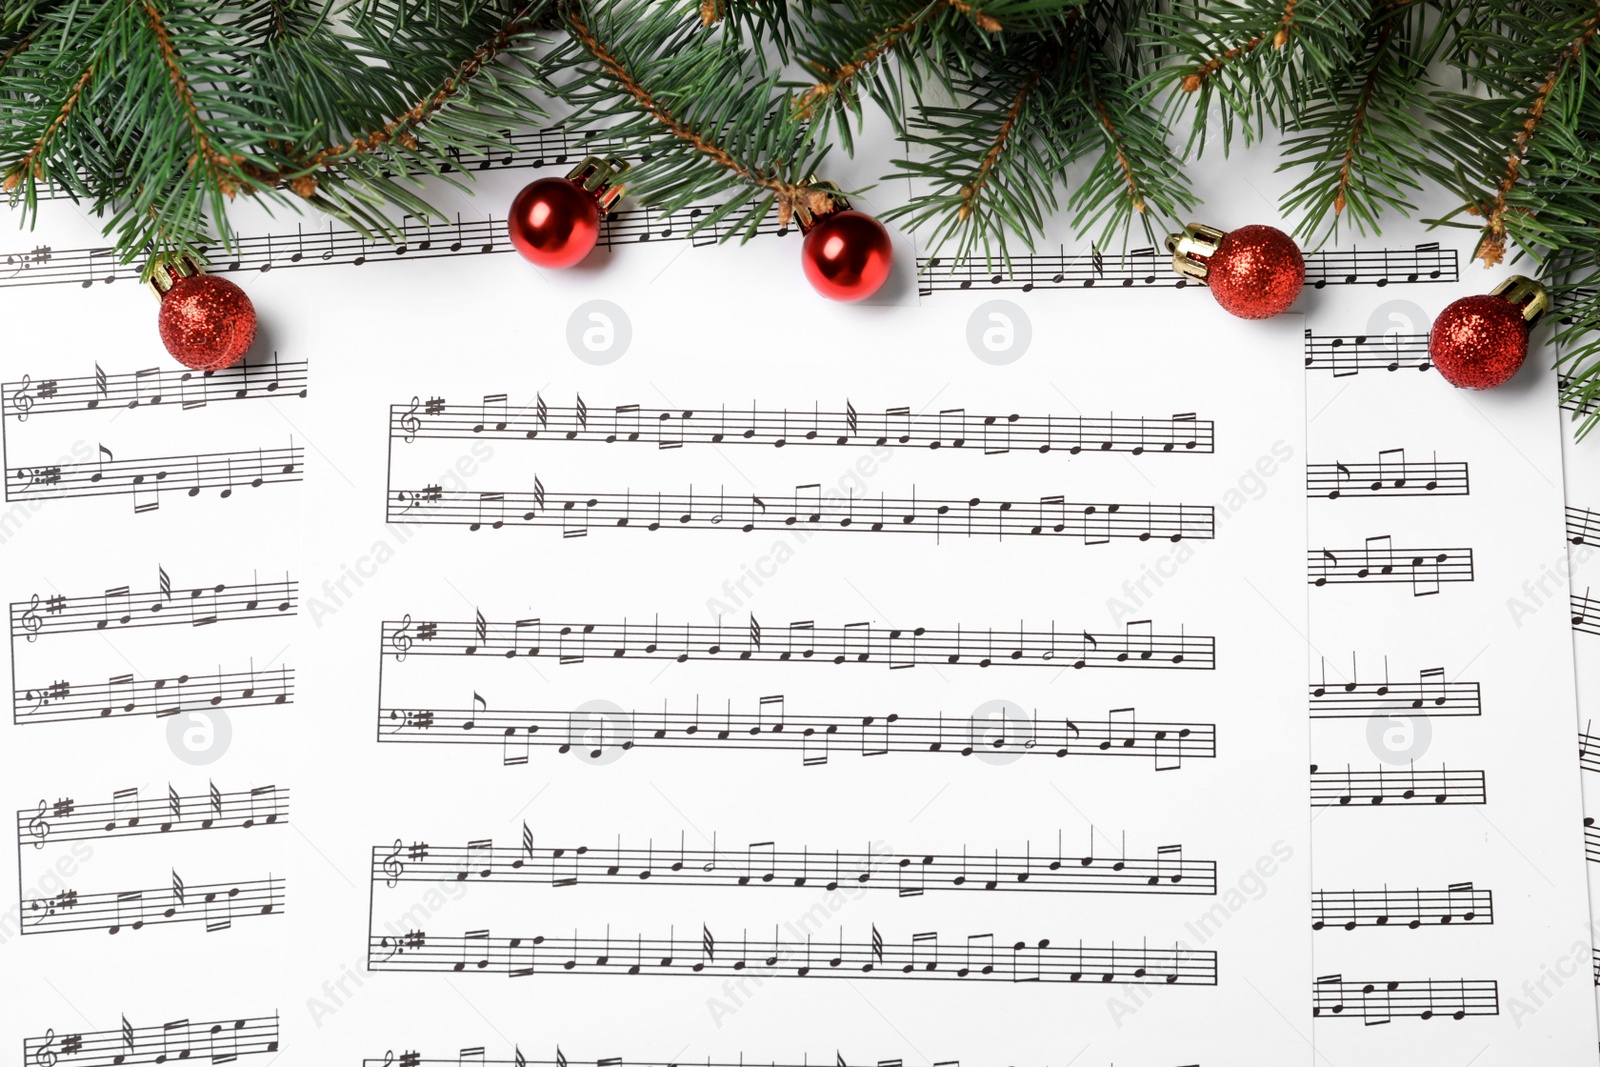 Photo of Fir tree branches and red balls on Christmas music sheets with notes, flat lay